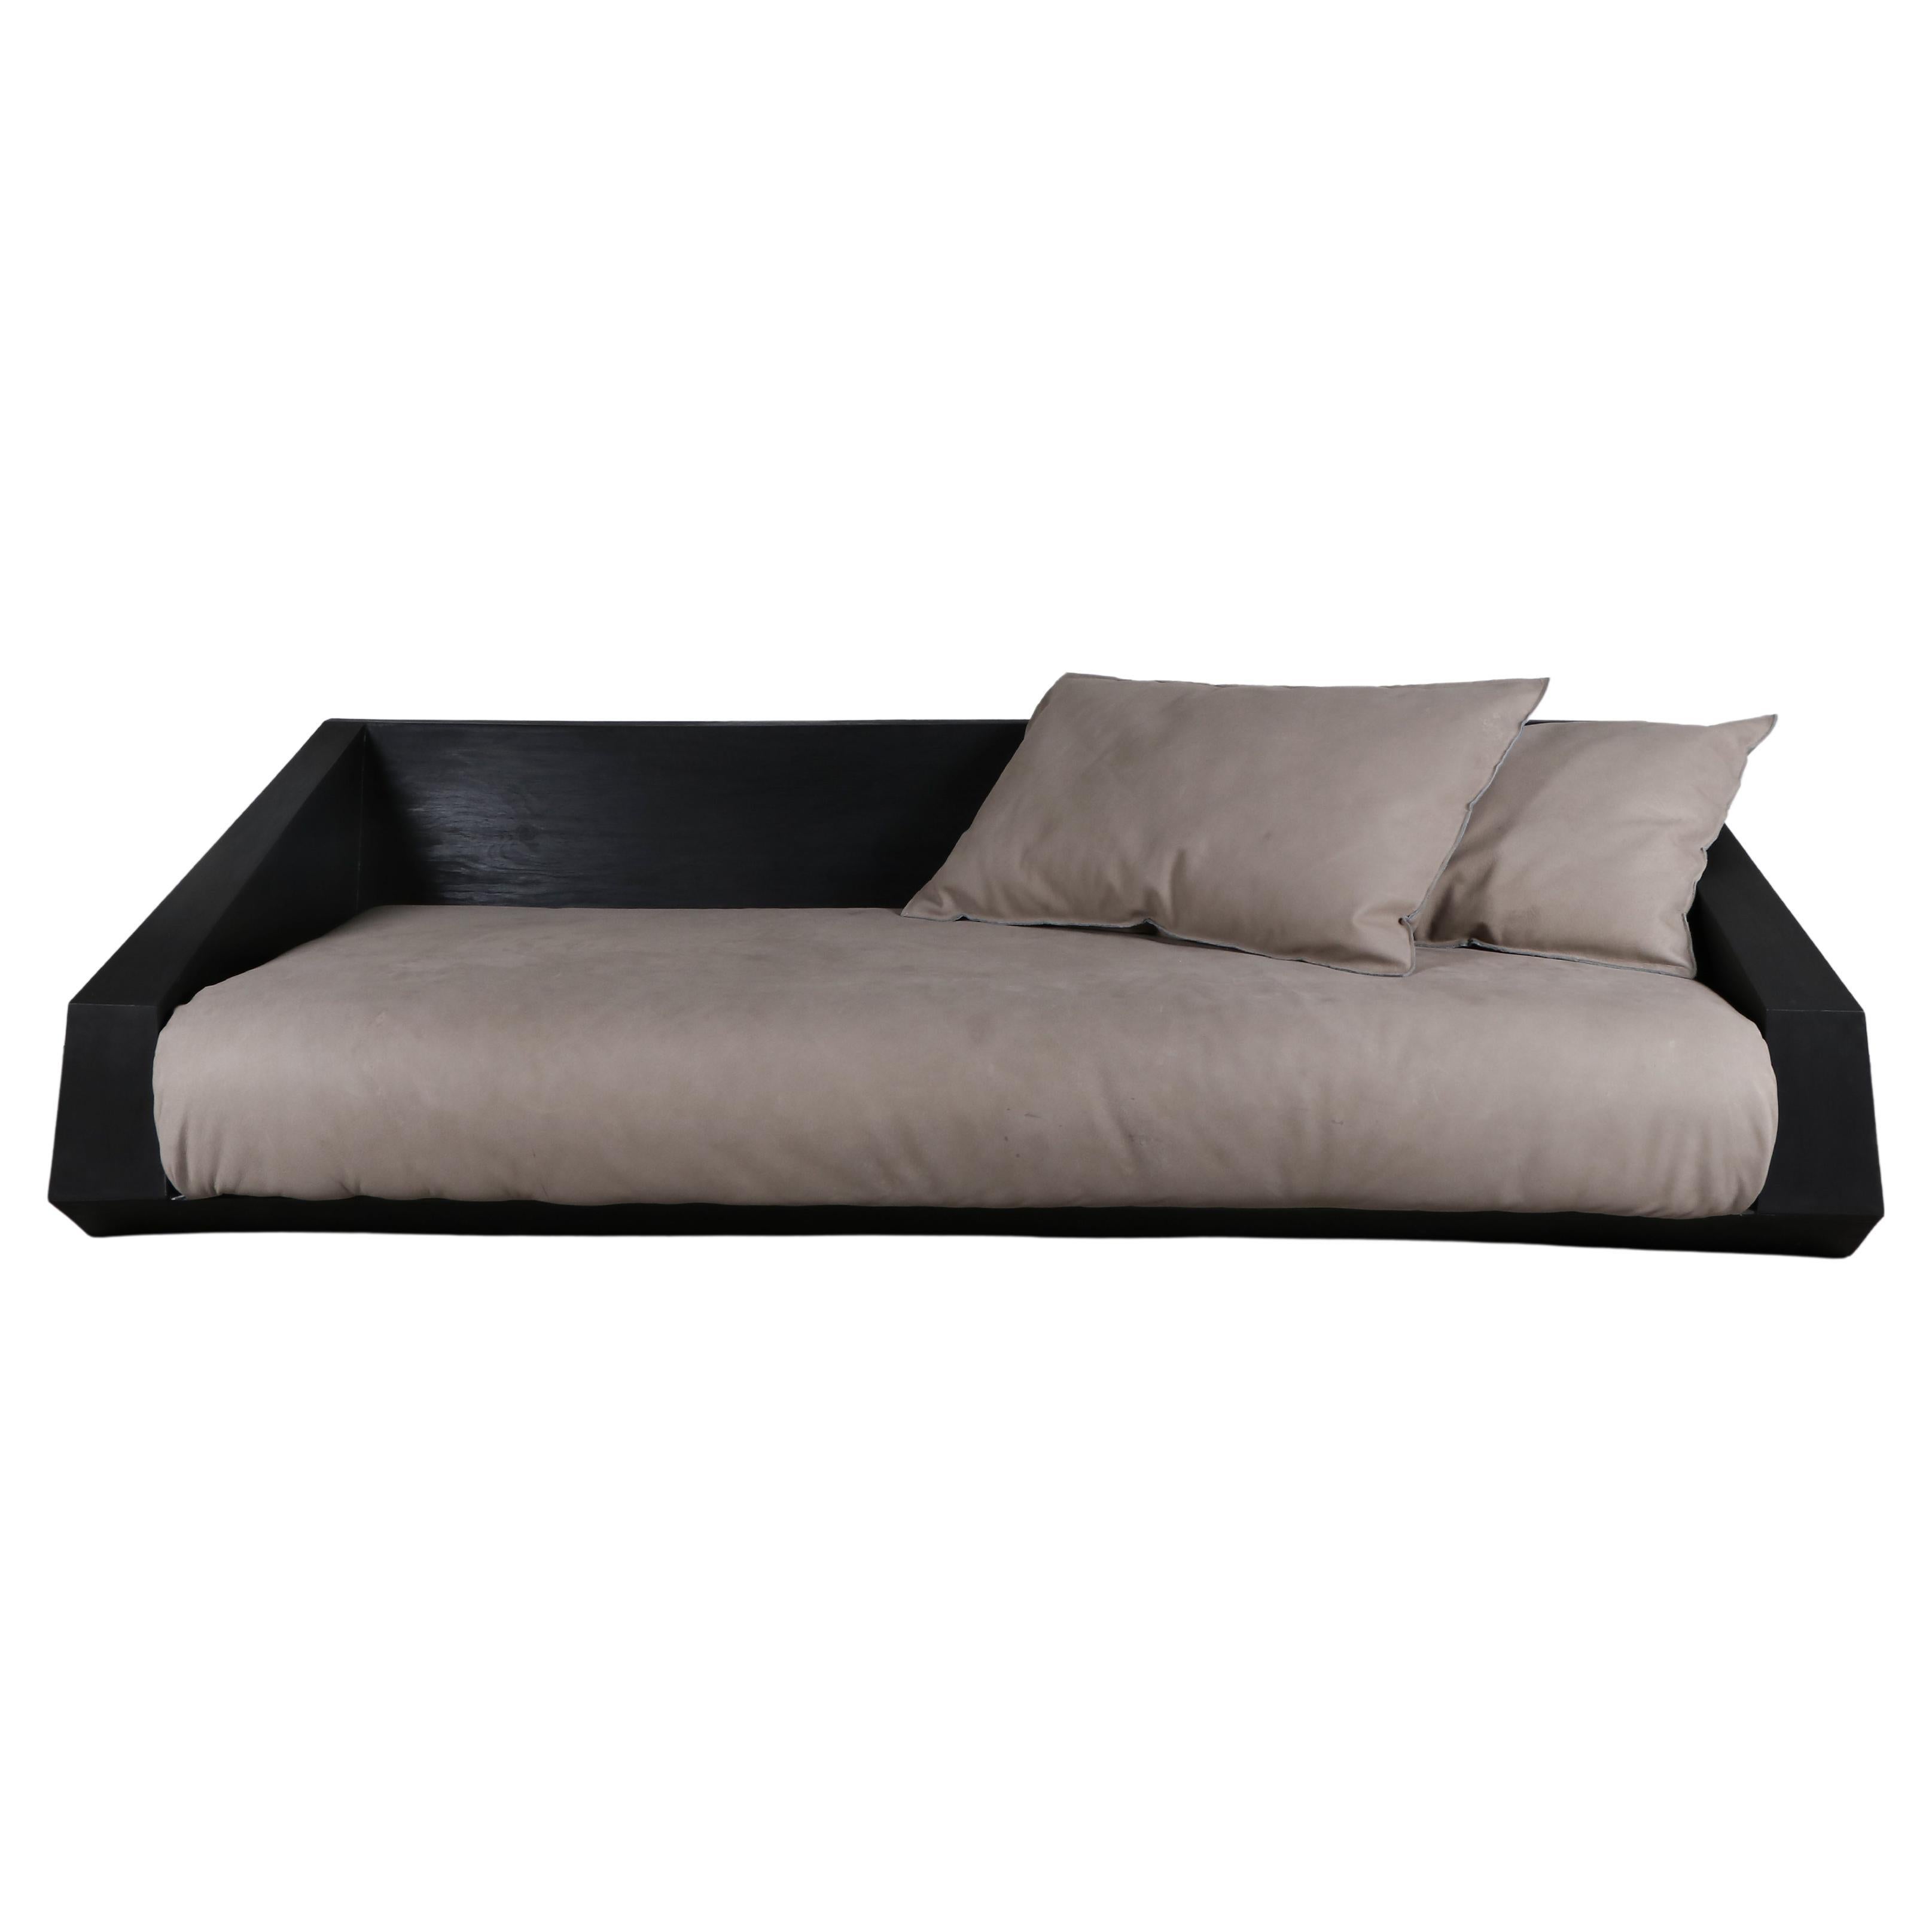 Djup Sofa by Lucas Tyra Morten For Sale